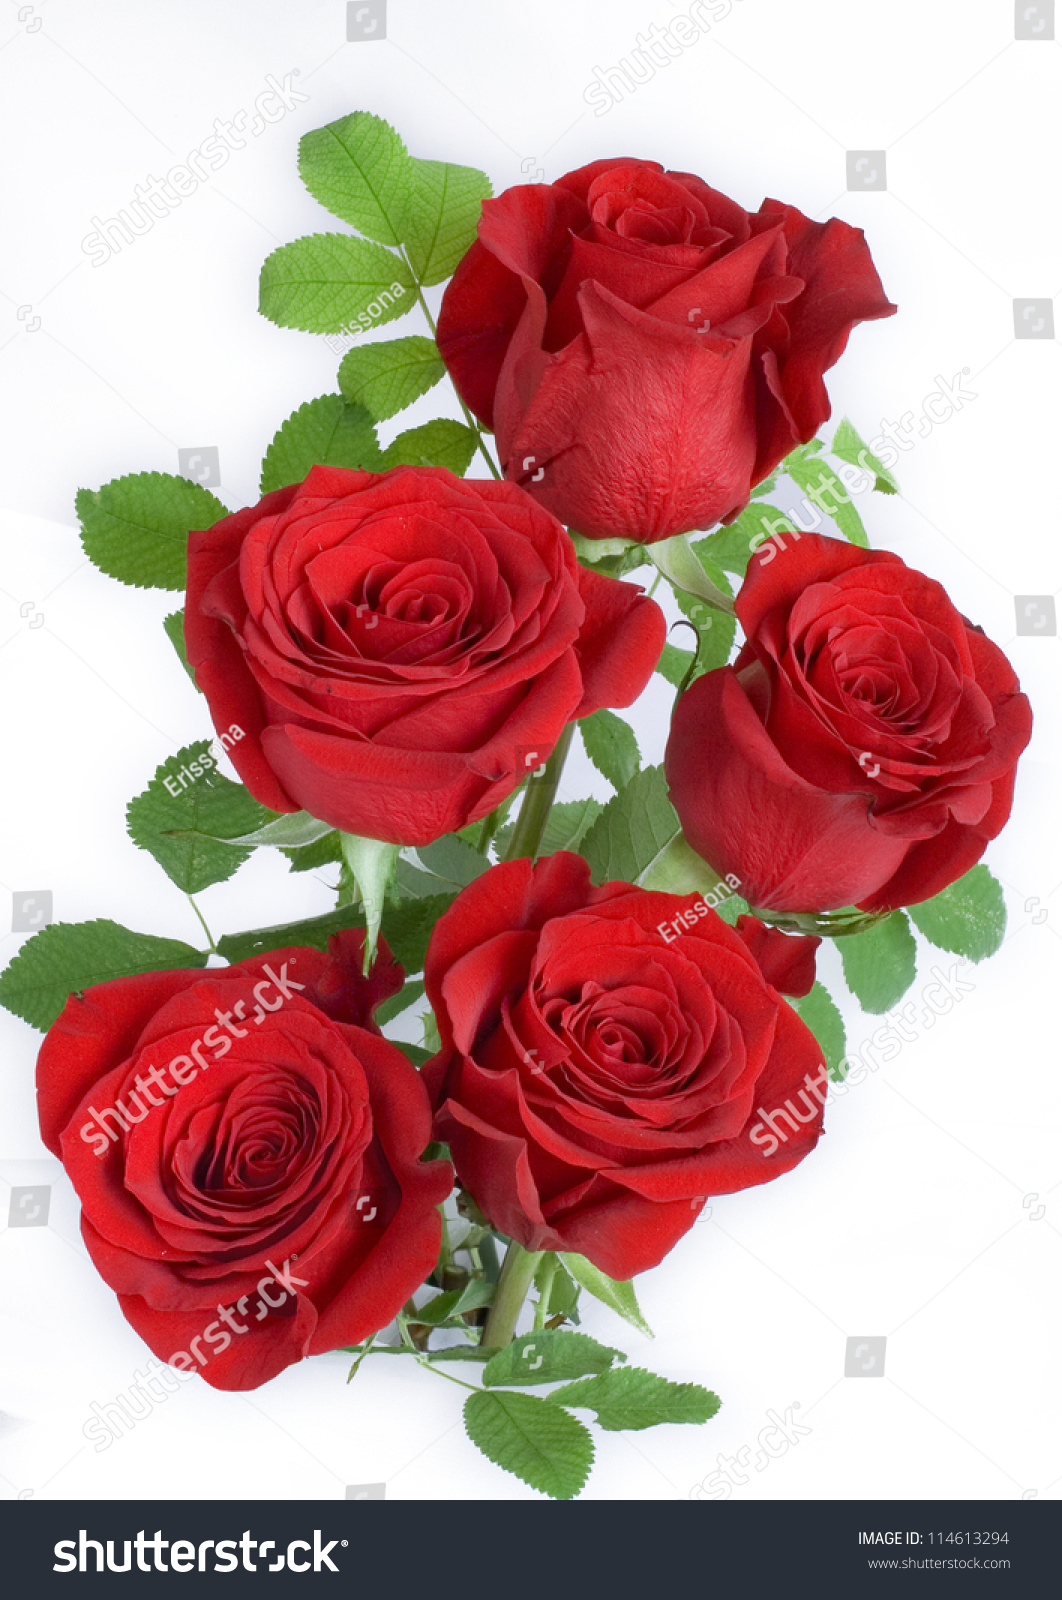 A Bunch Of Red Roses Stock Photo 114613294 : Shutterstock